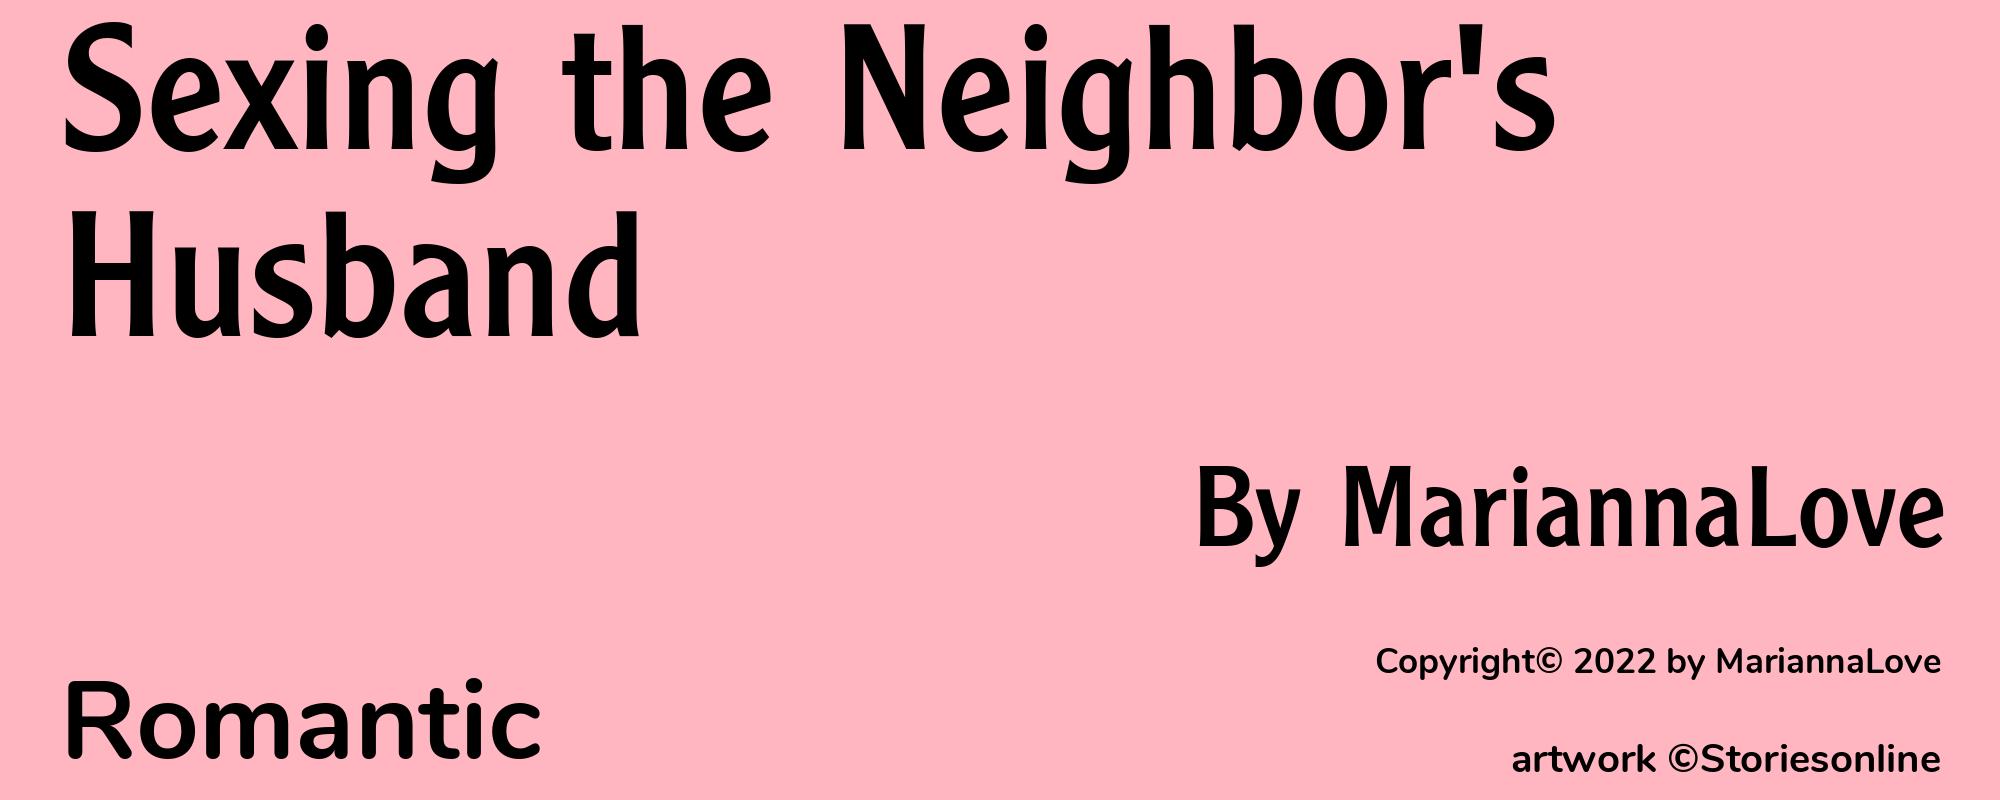 Sexing the Neighbor's Husband - Cover